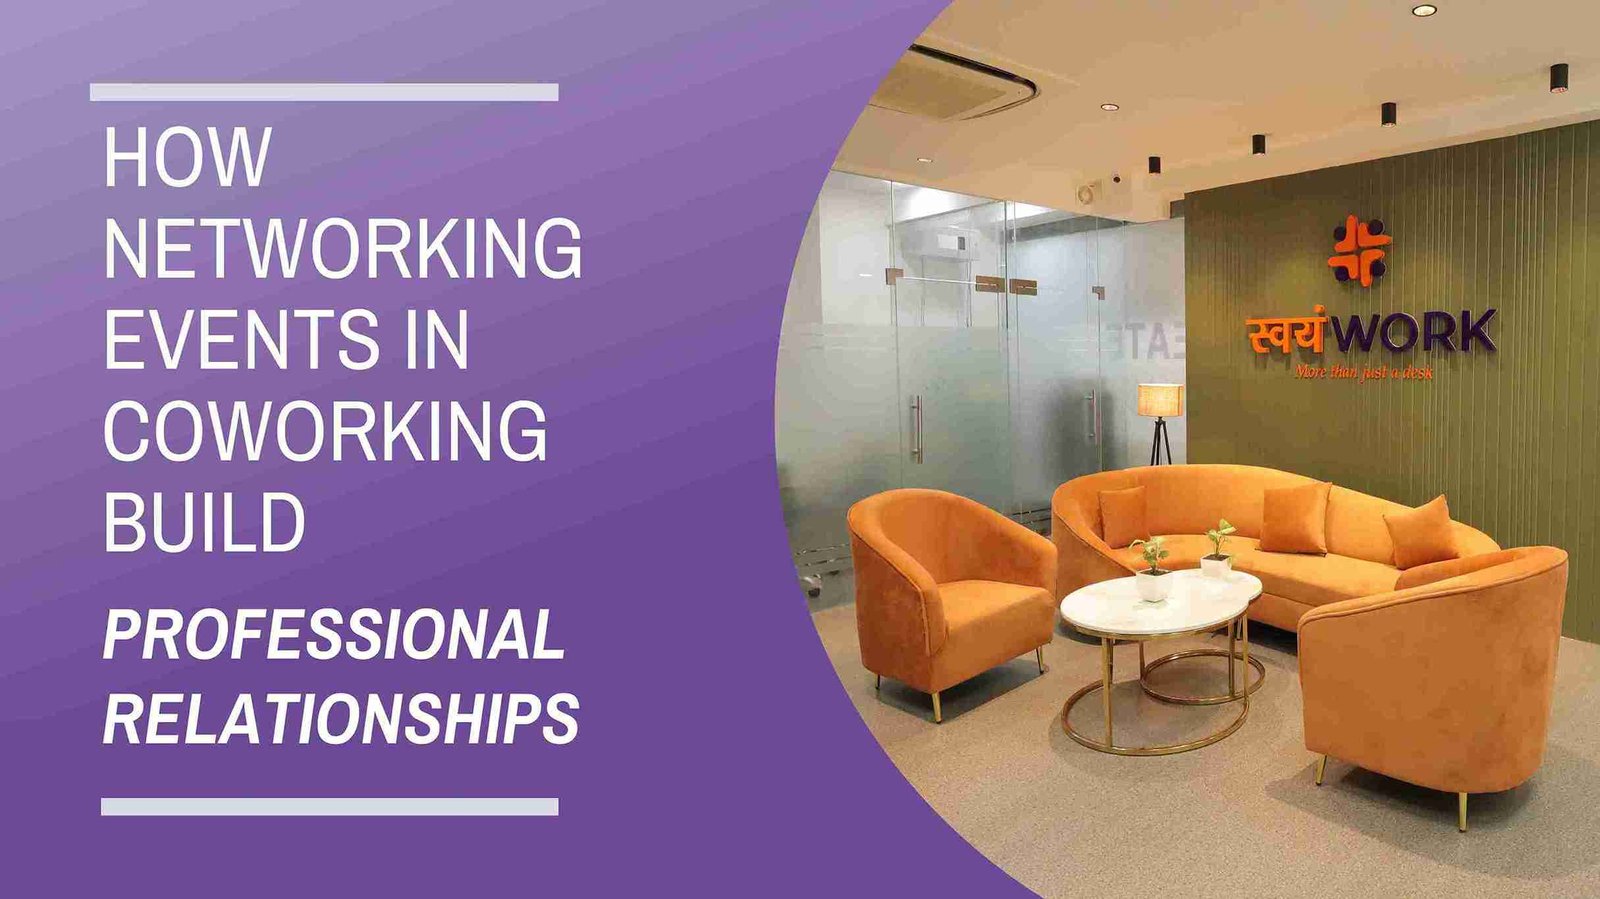 How Networking Events in Coworking Build Professional Relationships